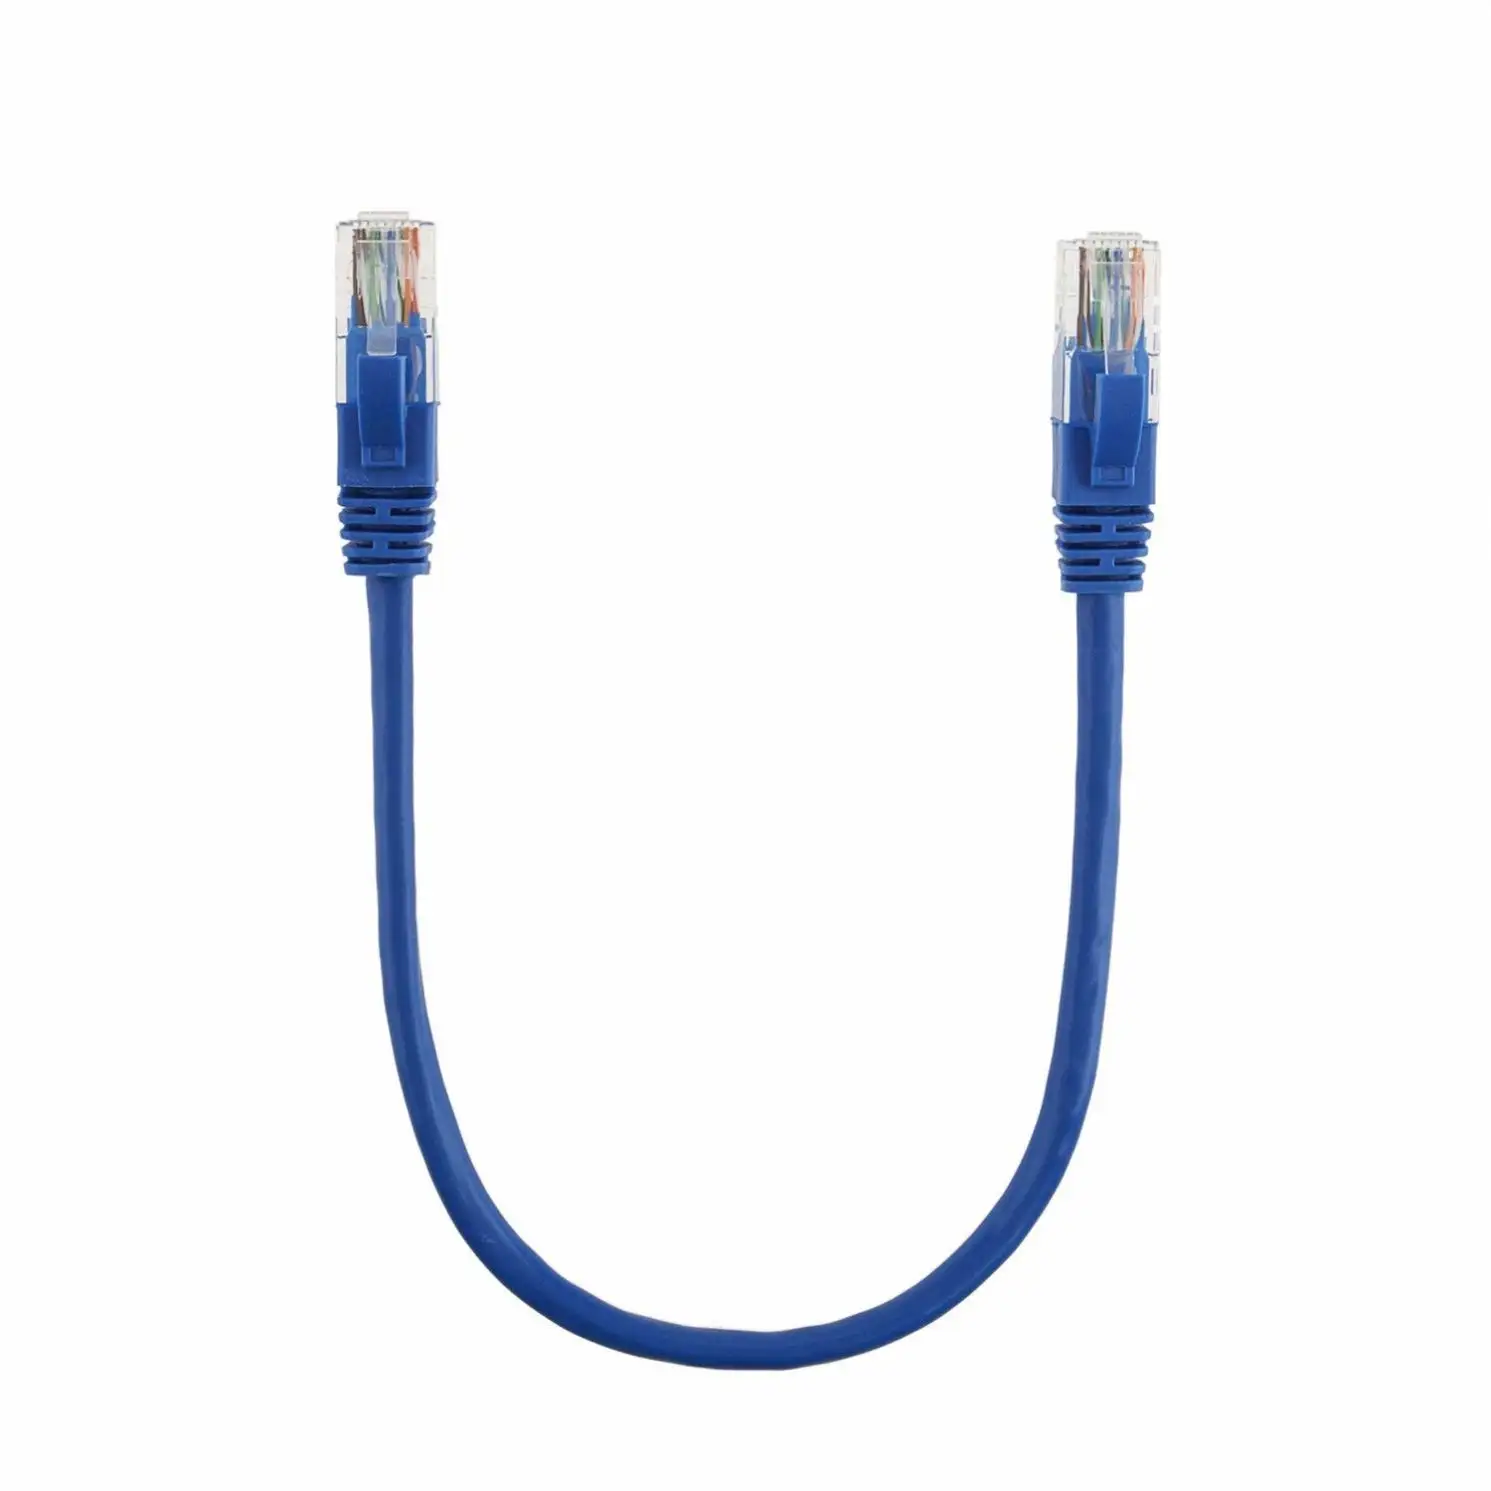 Good Quality Cross Cord Connector Cat5e Rj45 Conector Ethernet Cat6a Cat5 Cat5a Network Utp Lan Tester Cat6 Outdoor Cable